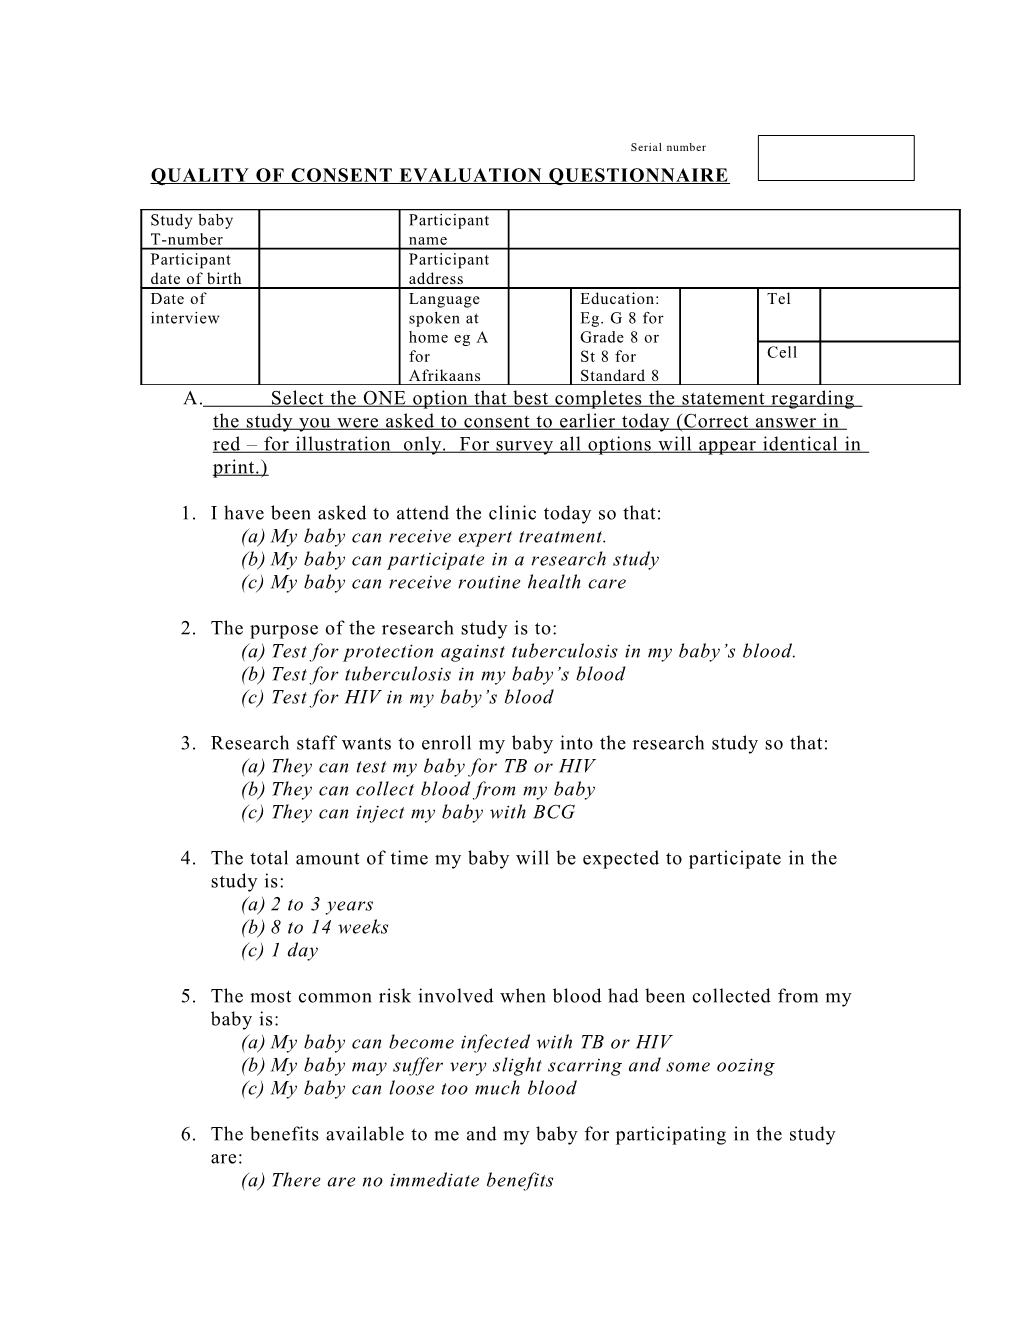 Quality of Consent Evaluation Questionnaire